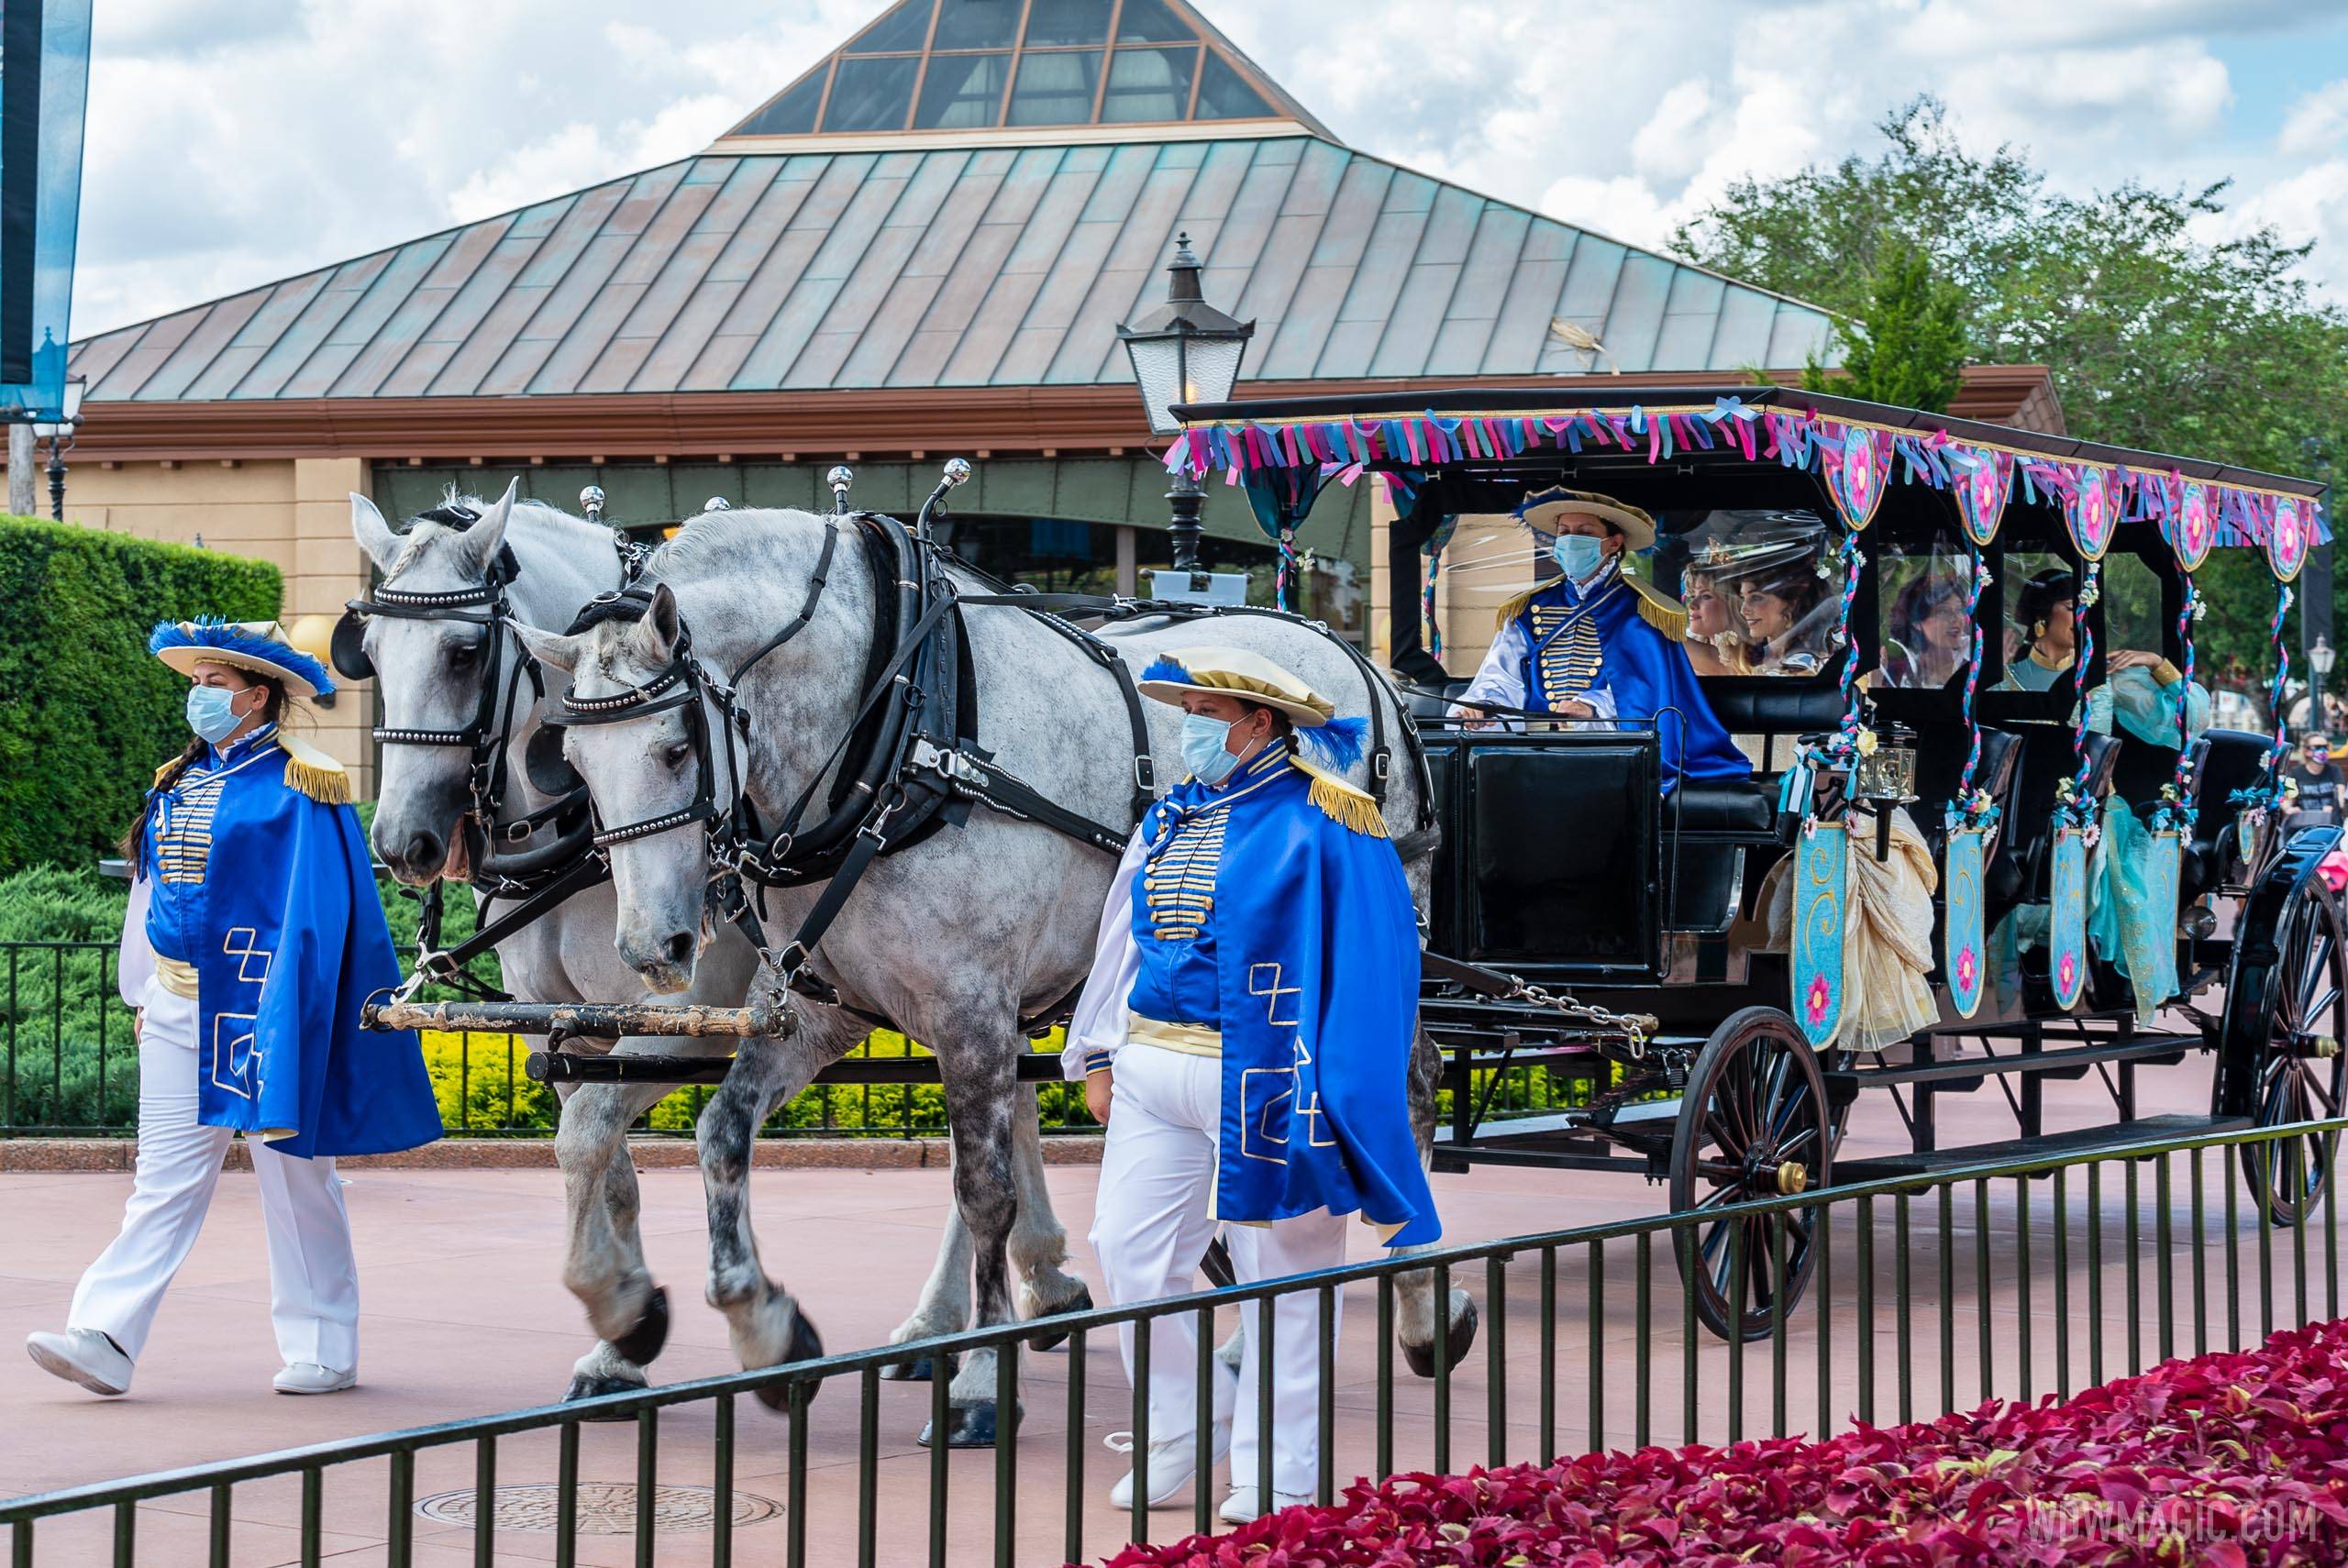 Disney World's character cavalcade showtimes are now listed in My Disney Experience